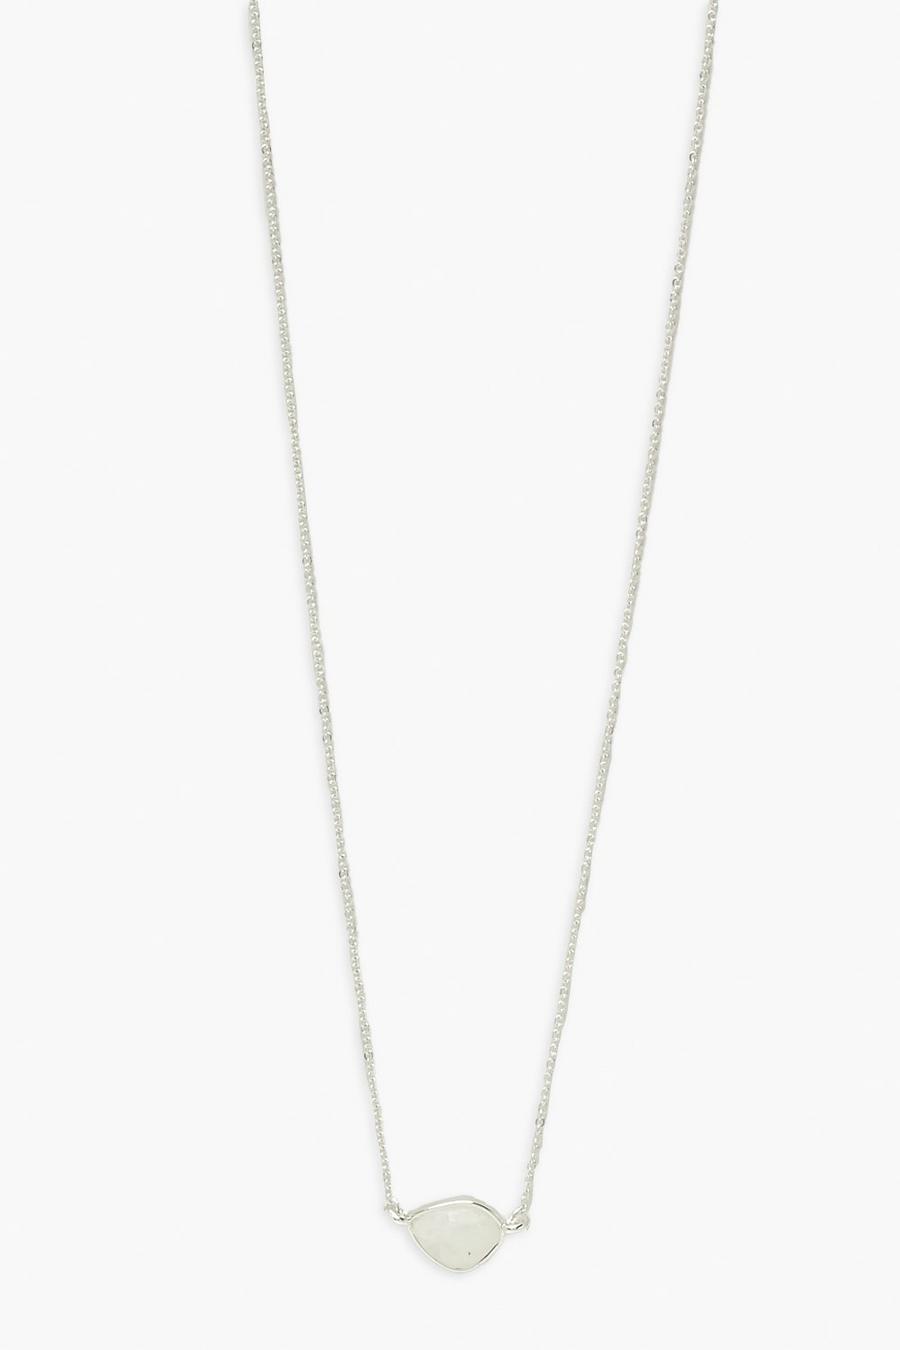 Real Silver Plated Bridesmaid Necklace